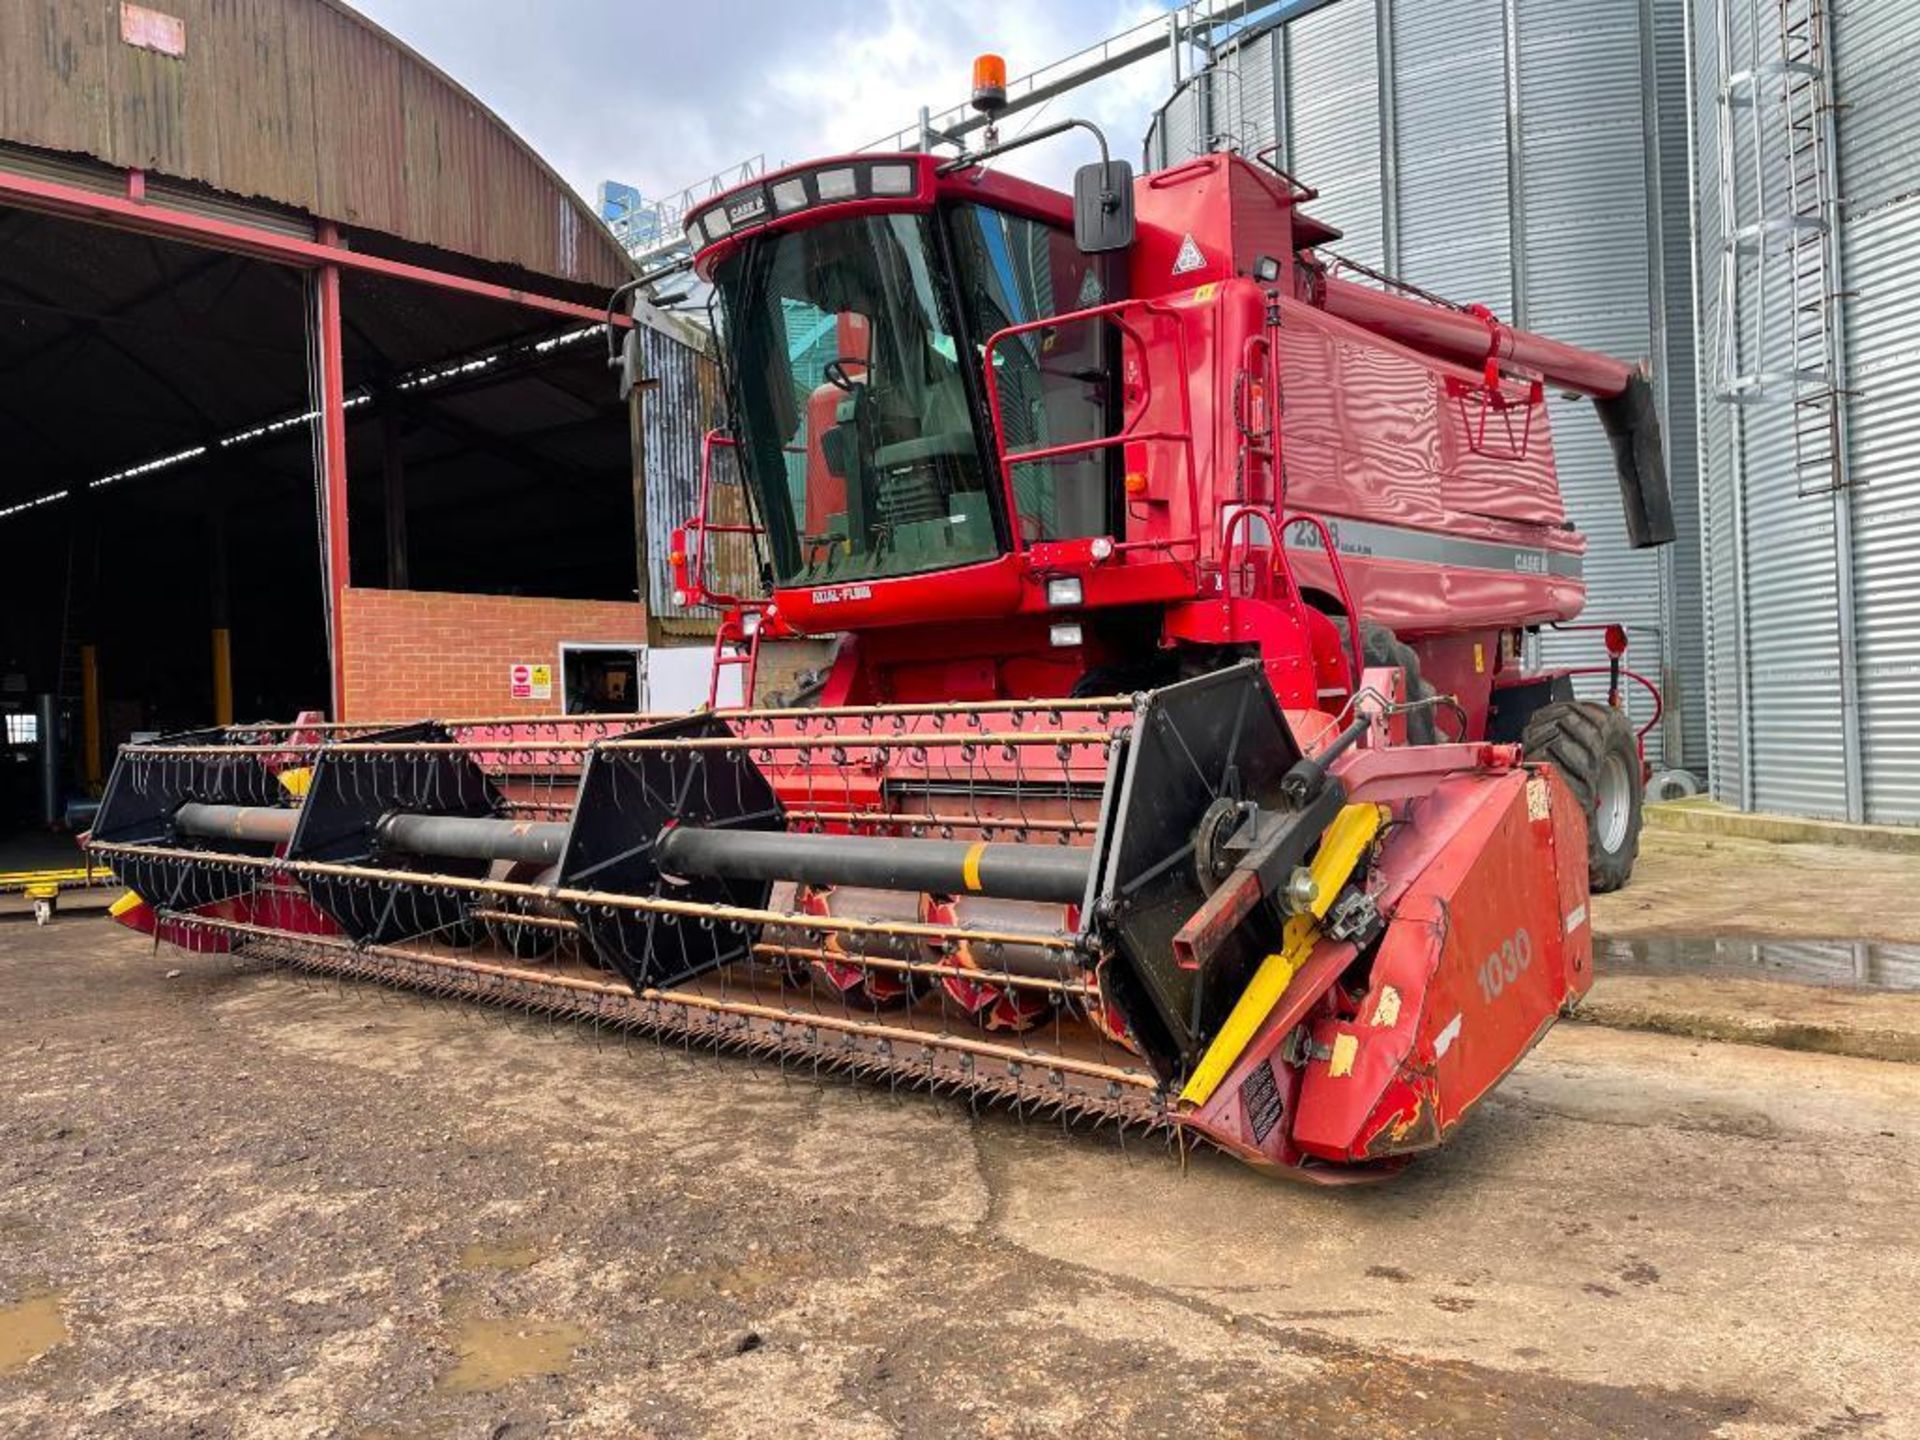 2006 Case Axial Flow 2388 Xclusive combine harvester on 800/65R32 front wheels and tyres with straw - Image 19 of 28